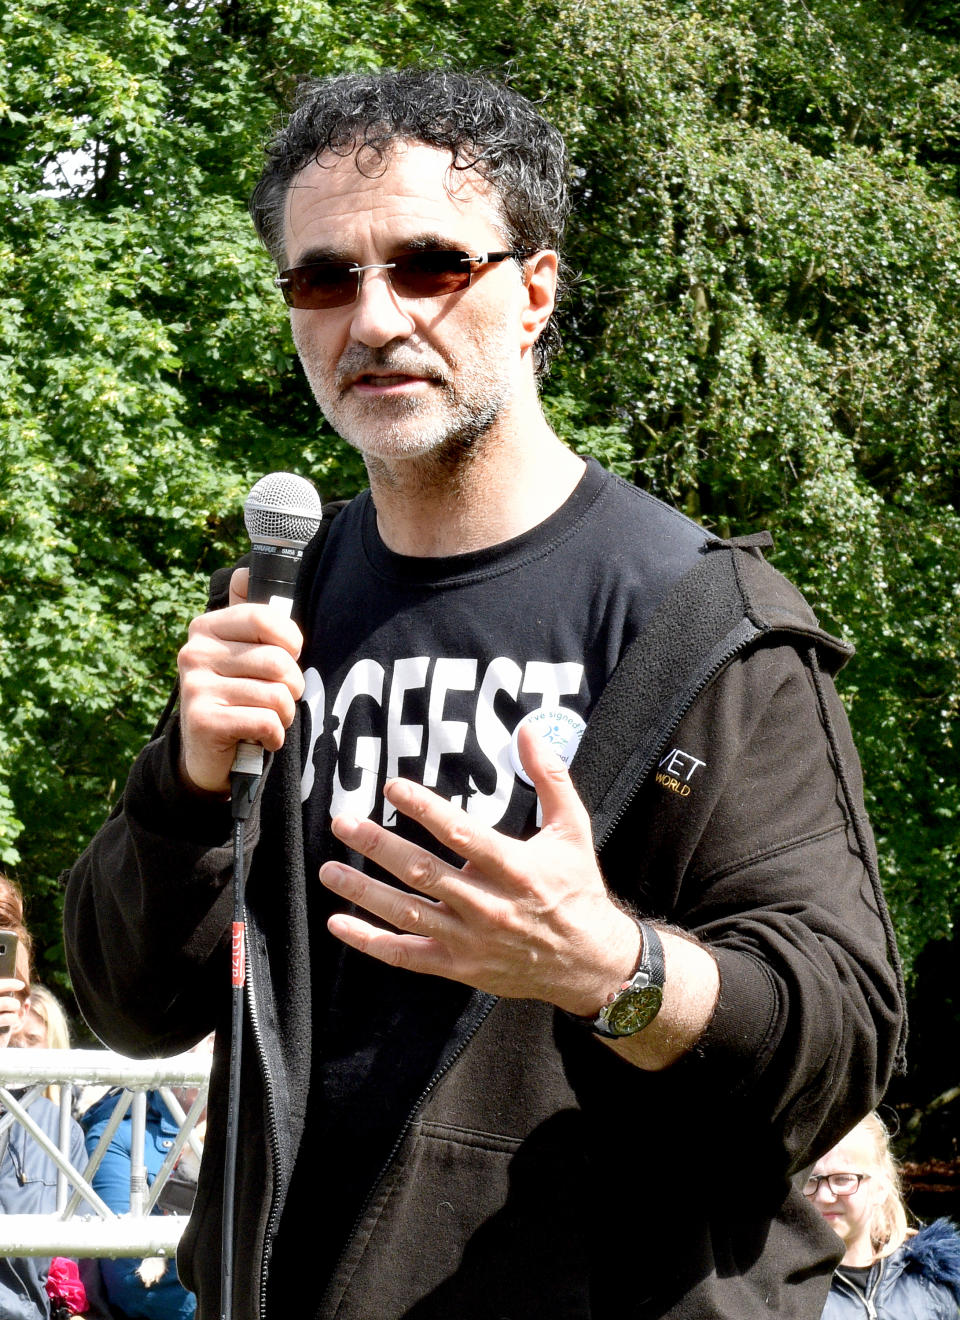 Noel Fitzpatrick had fitted the tortoise with bionic limbs. (Photo by Shirlaine Forrest/Getty Images)